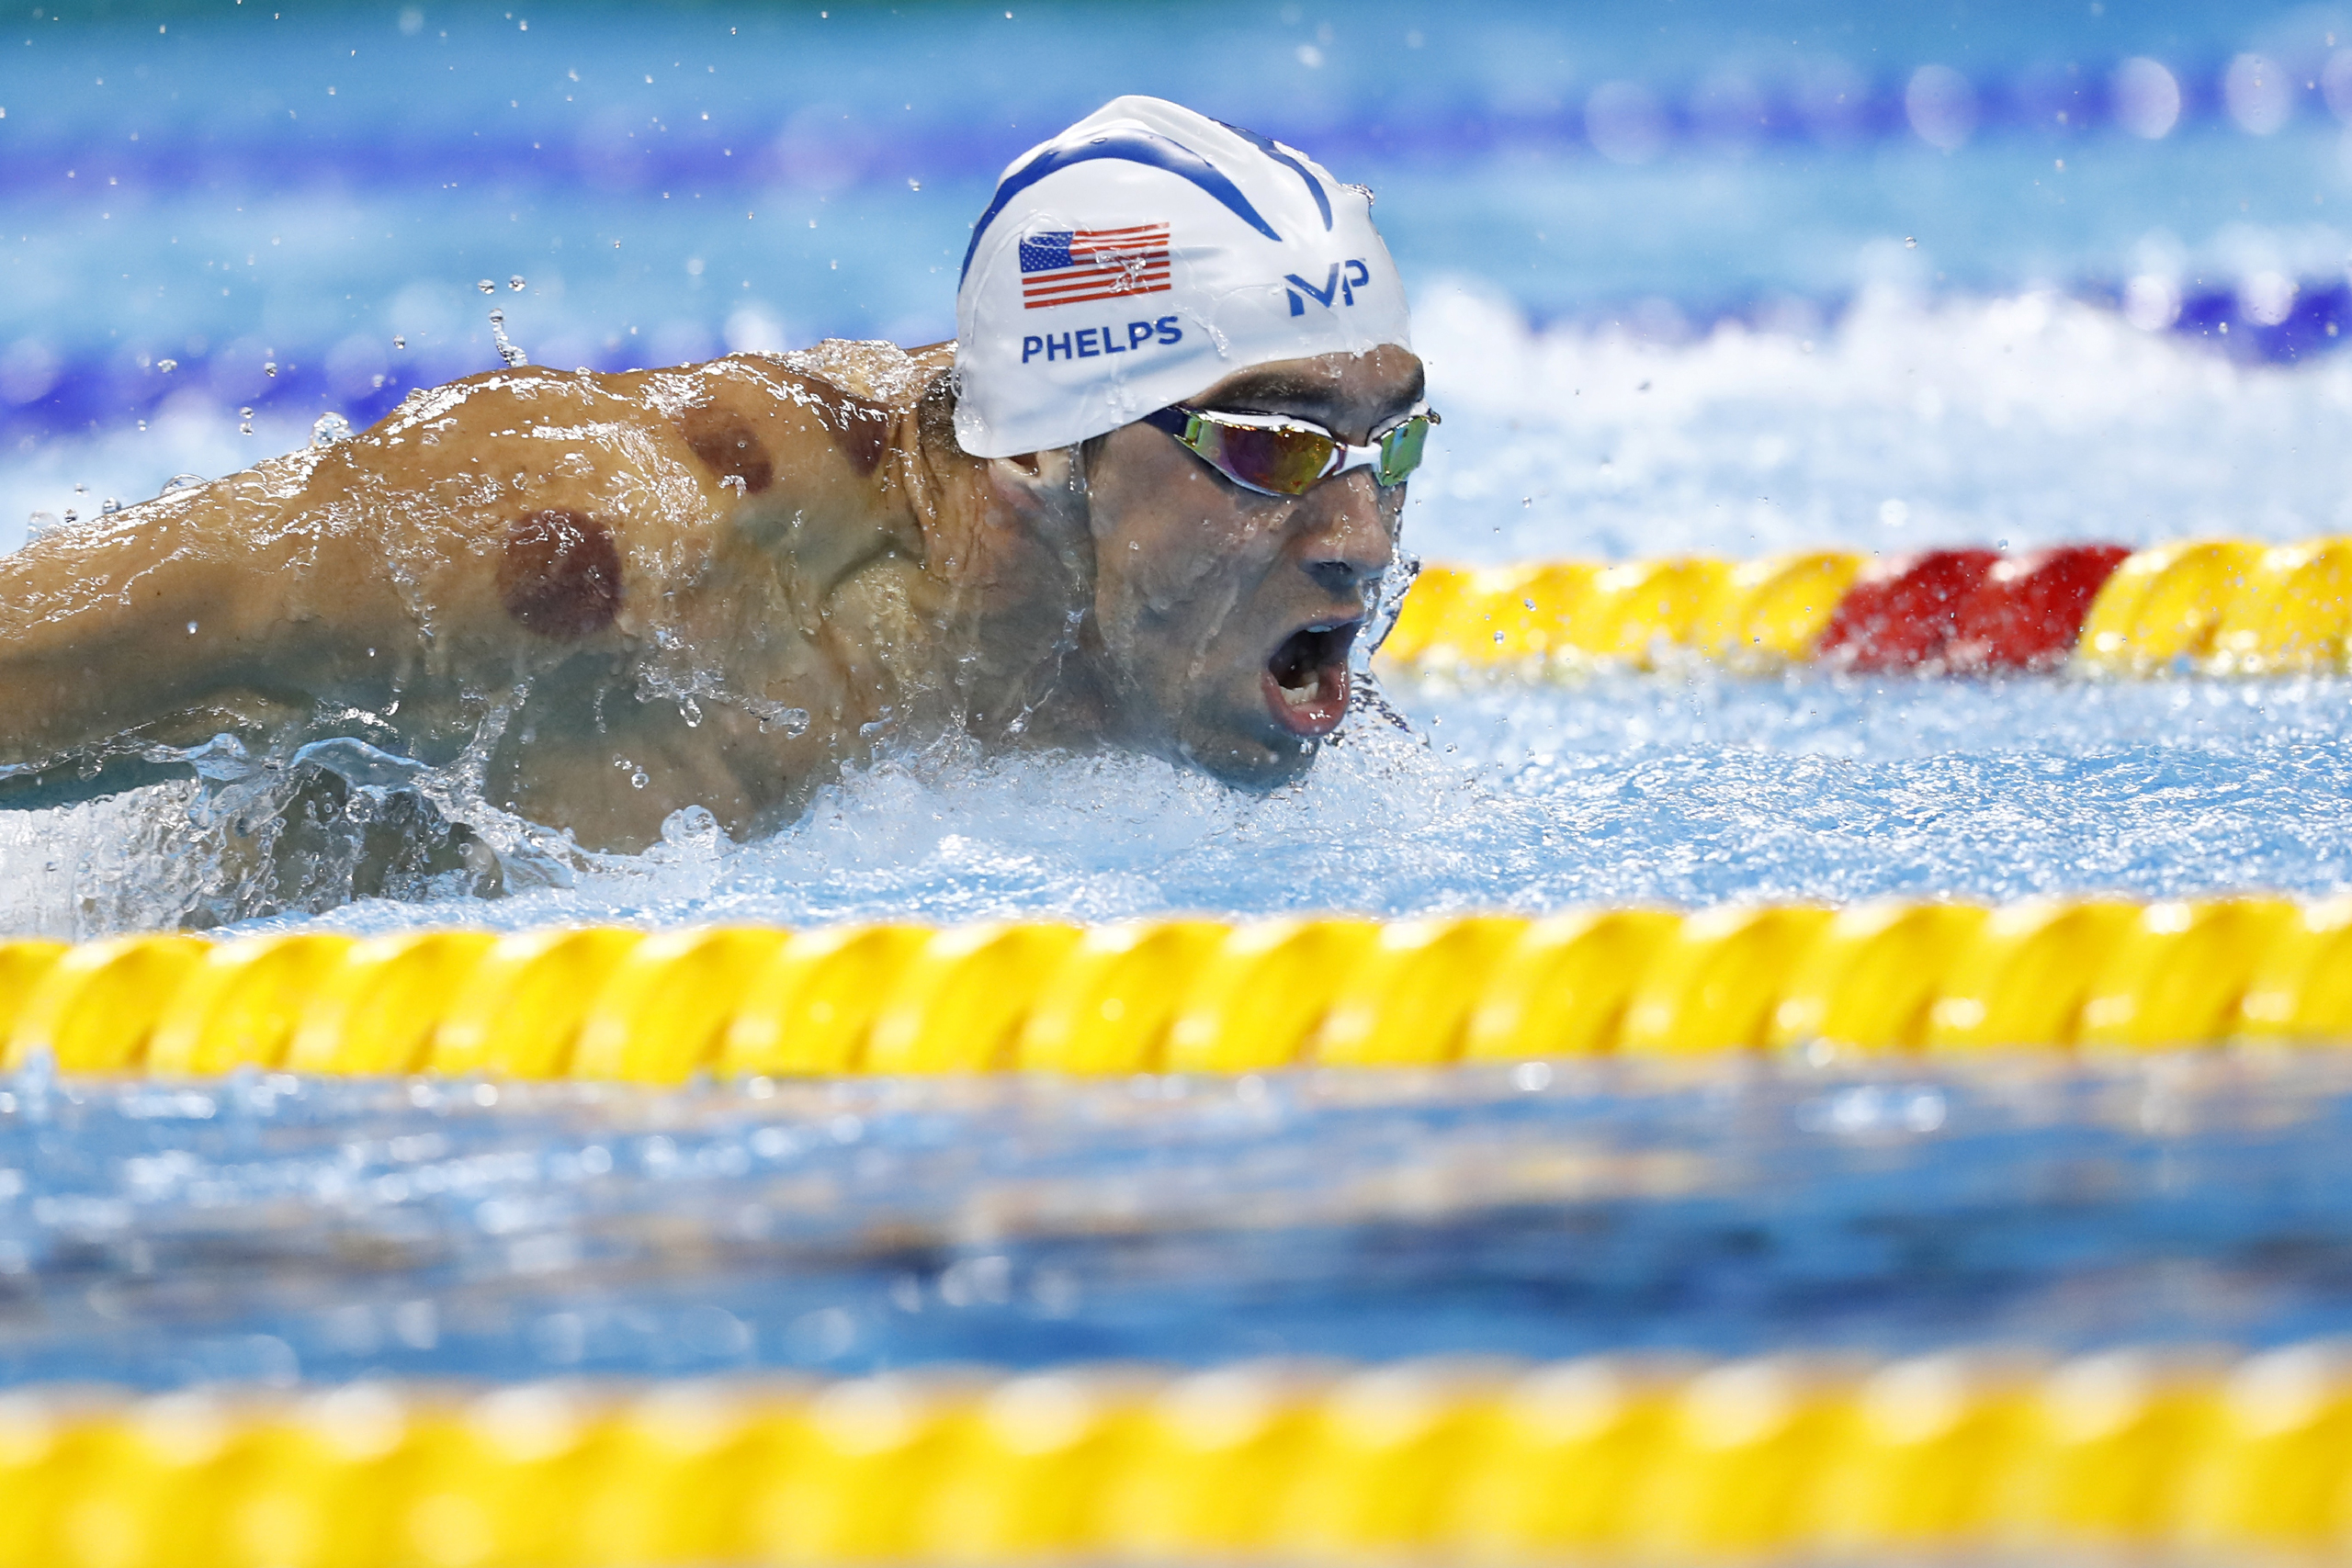 Michael Phelps competes in a men's 200-m butterfly heat during the swimming event at the Rio 2016 Olympic Games at the Olympic Aquatics Stadium in Rio de Janeiro on Aug. 8, 2016 (Odd Andersen—AFP/Getty Images)